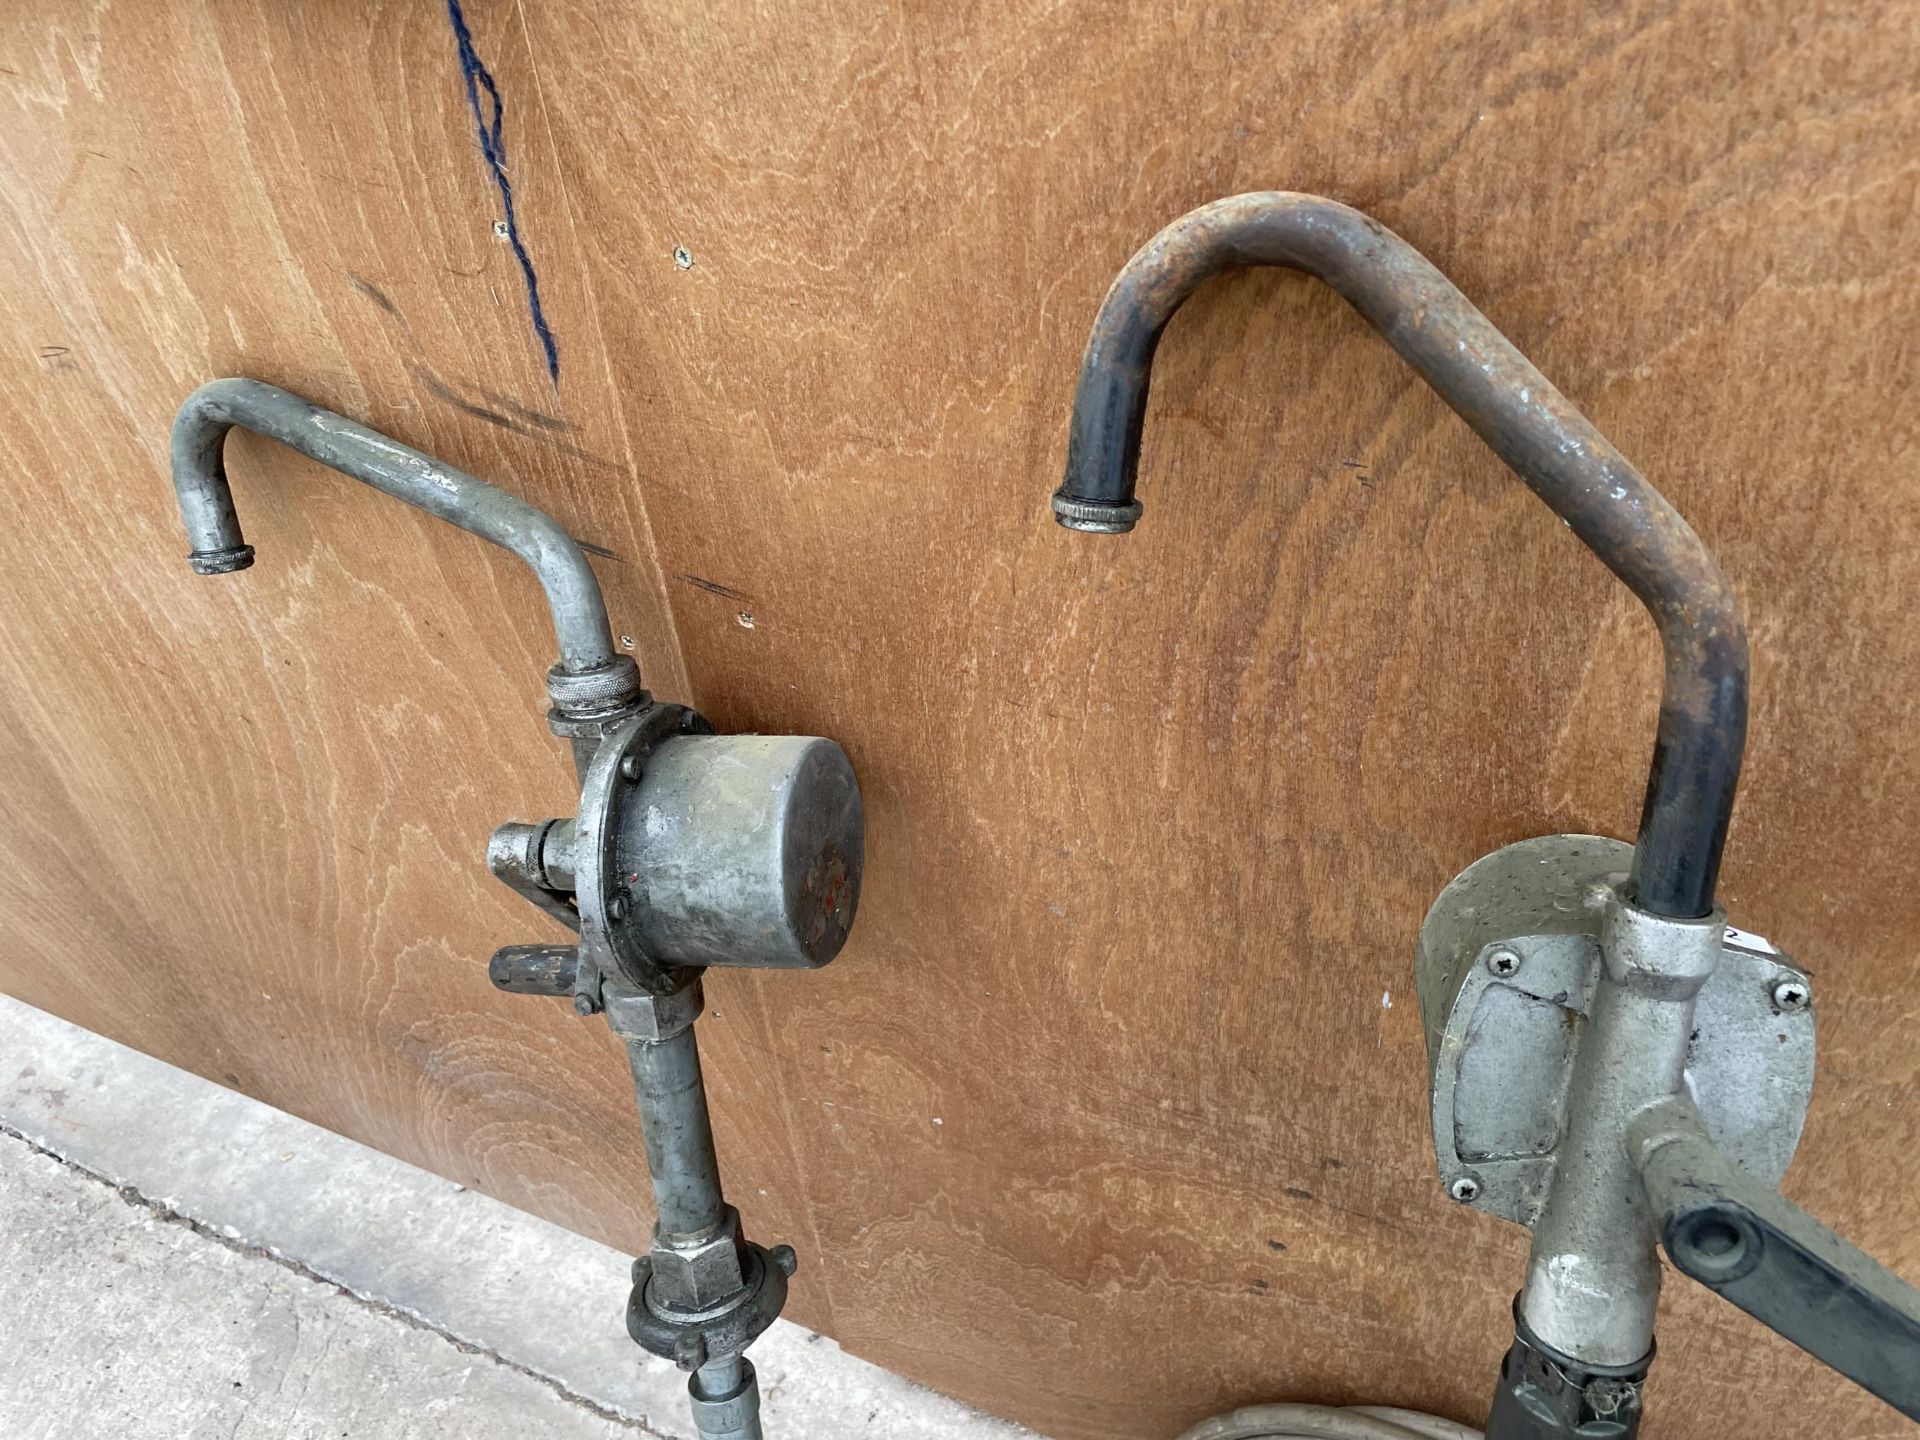 TWO BARREL PUMPS AND A PRESSURE WASHER HOSE AND LANCE - Image 2 of 3